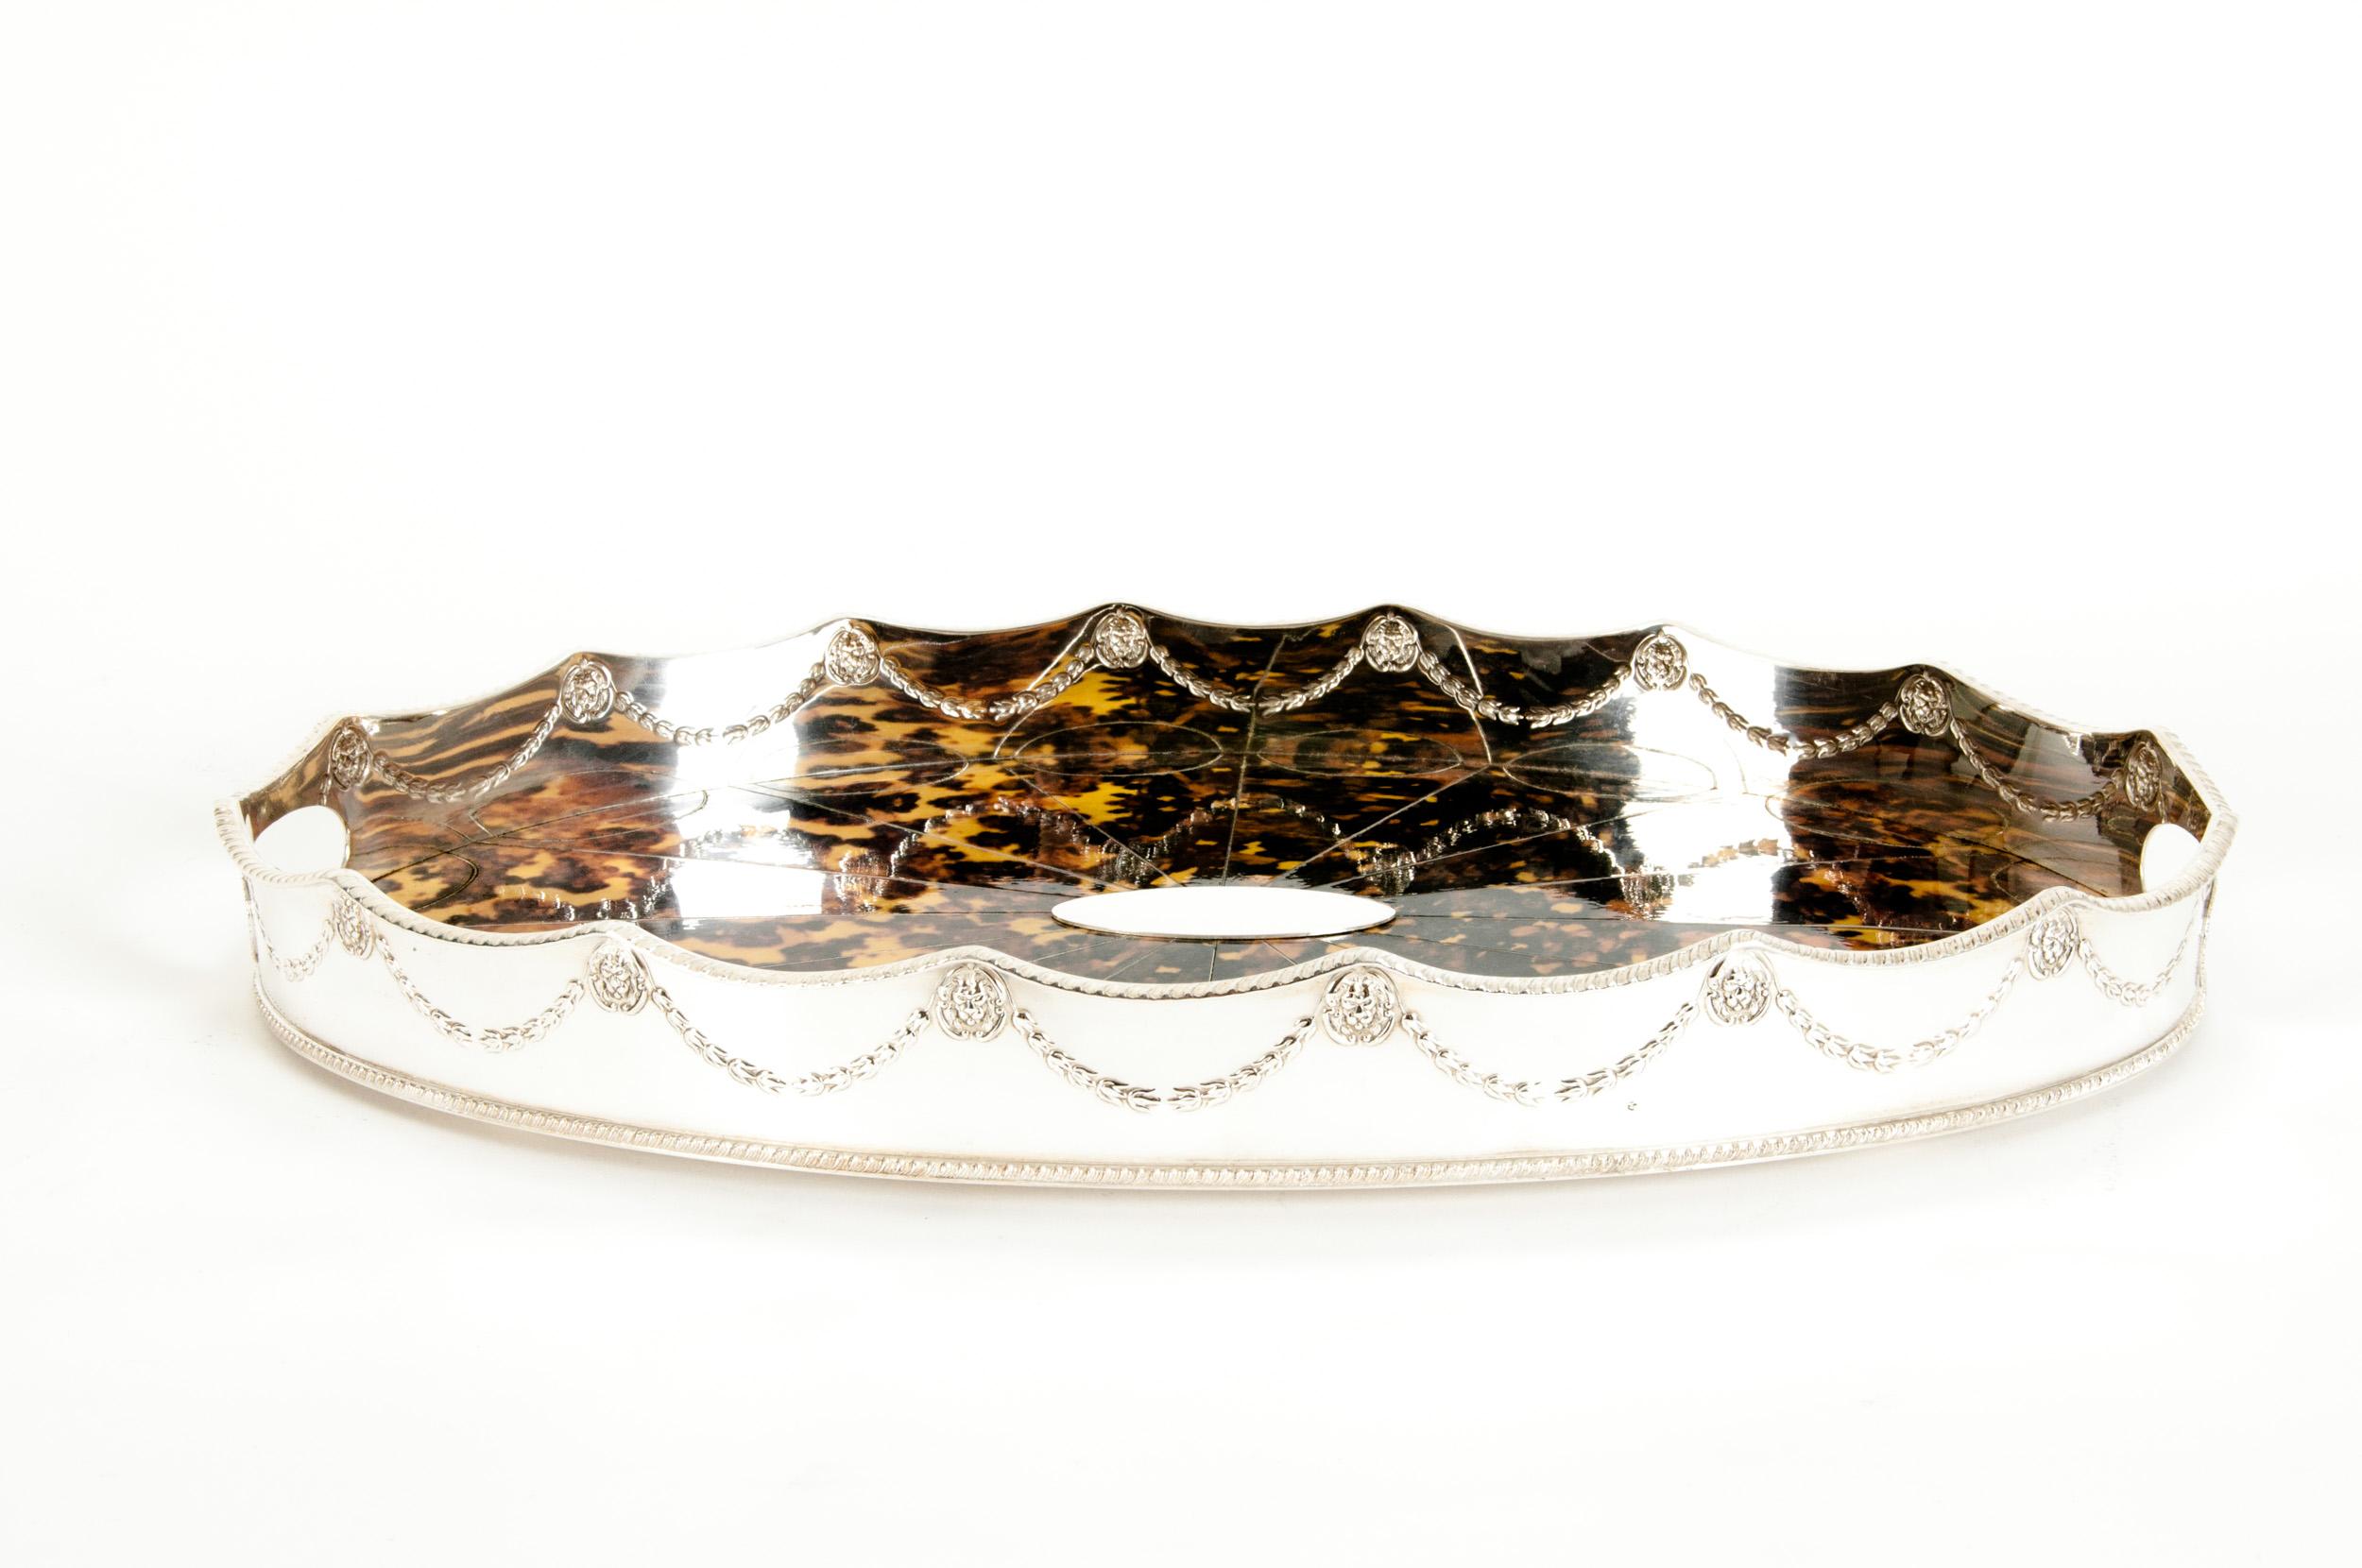 English Sheffield silver plated tortoiseshell interior barware / tableware footed serving tray with garland border design details. The tray is in great condition. Minor wear consistent with age / use. Maker's mark undersigned. The tray is about 20